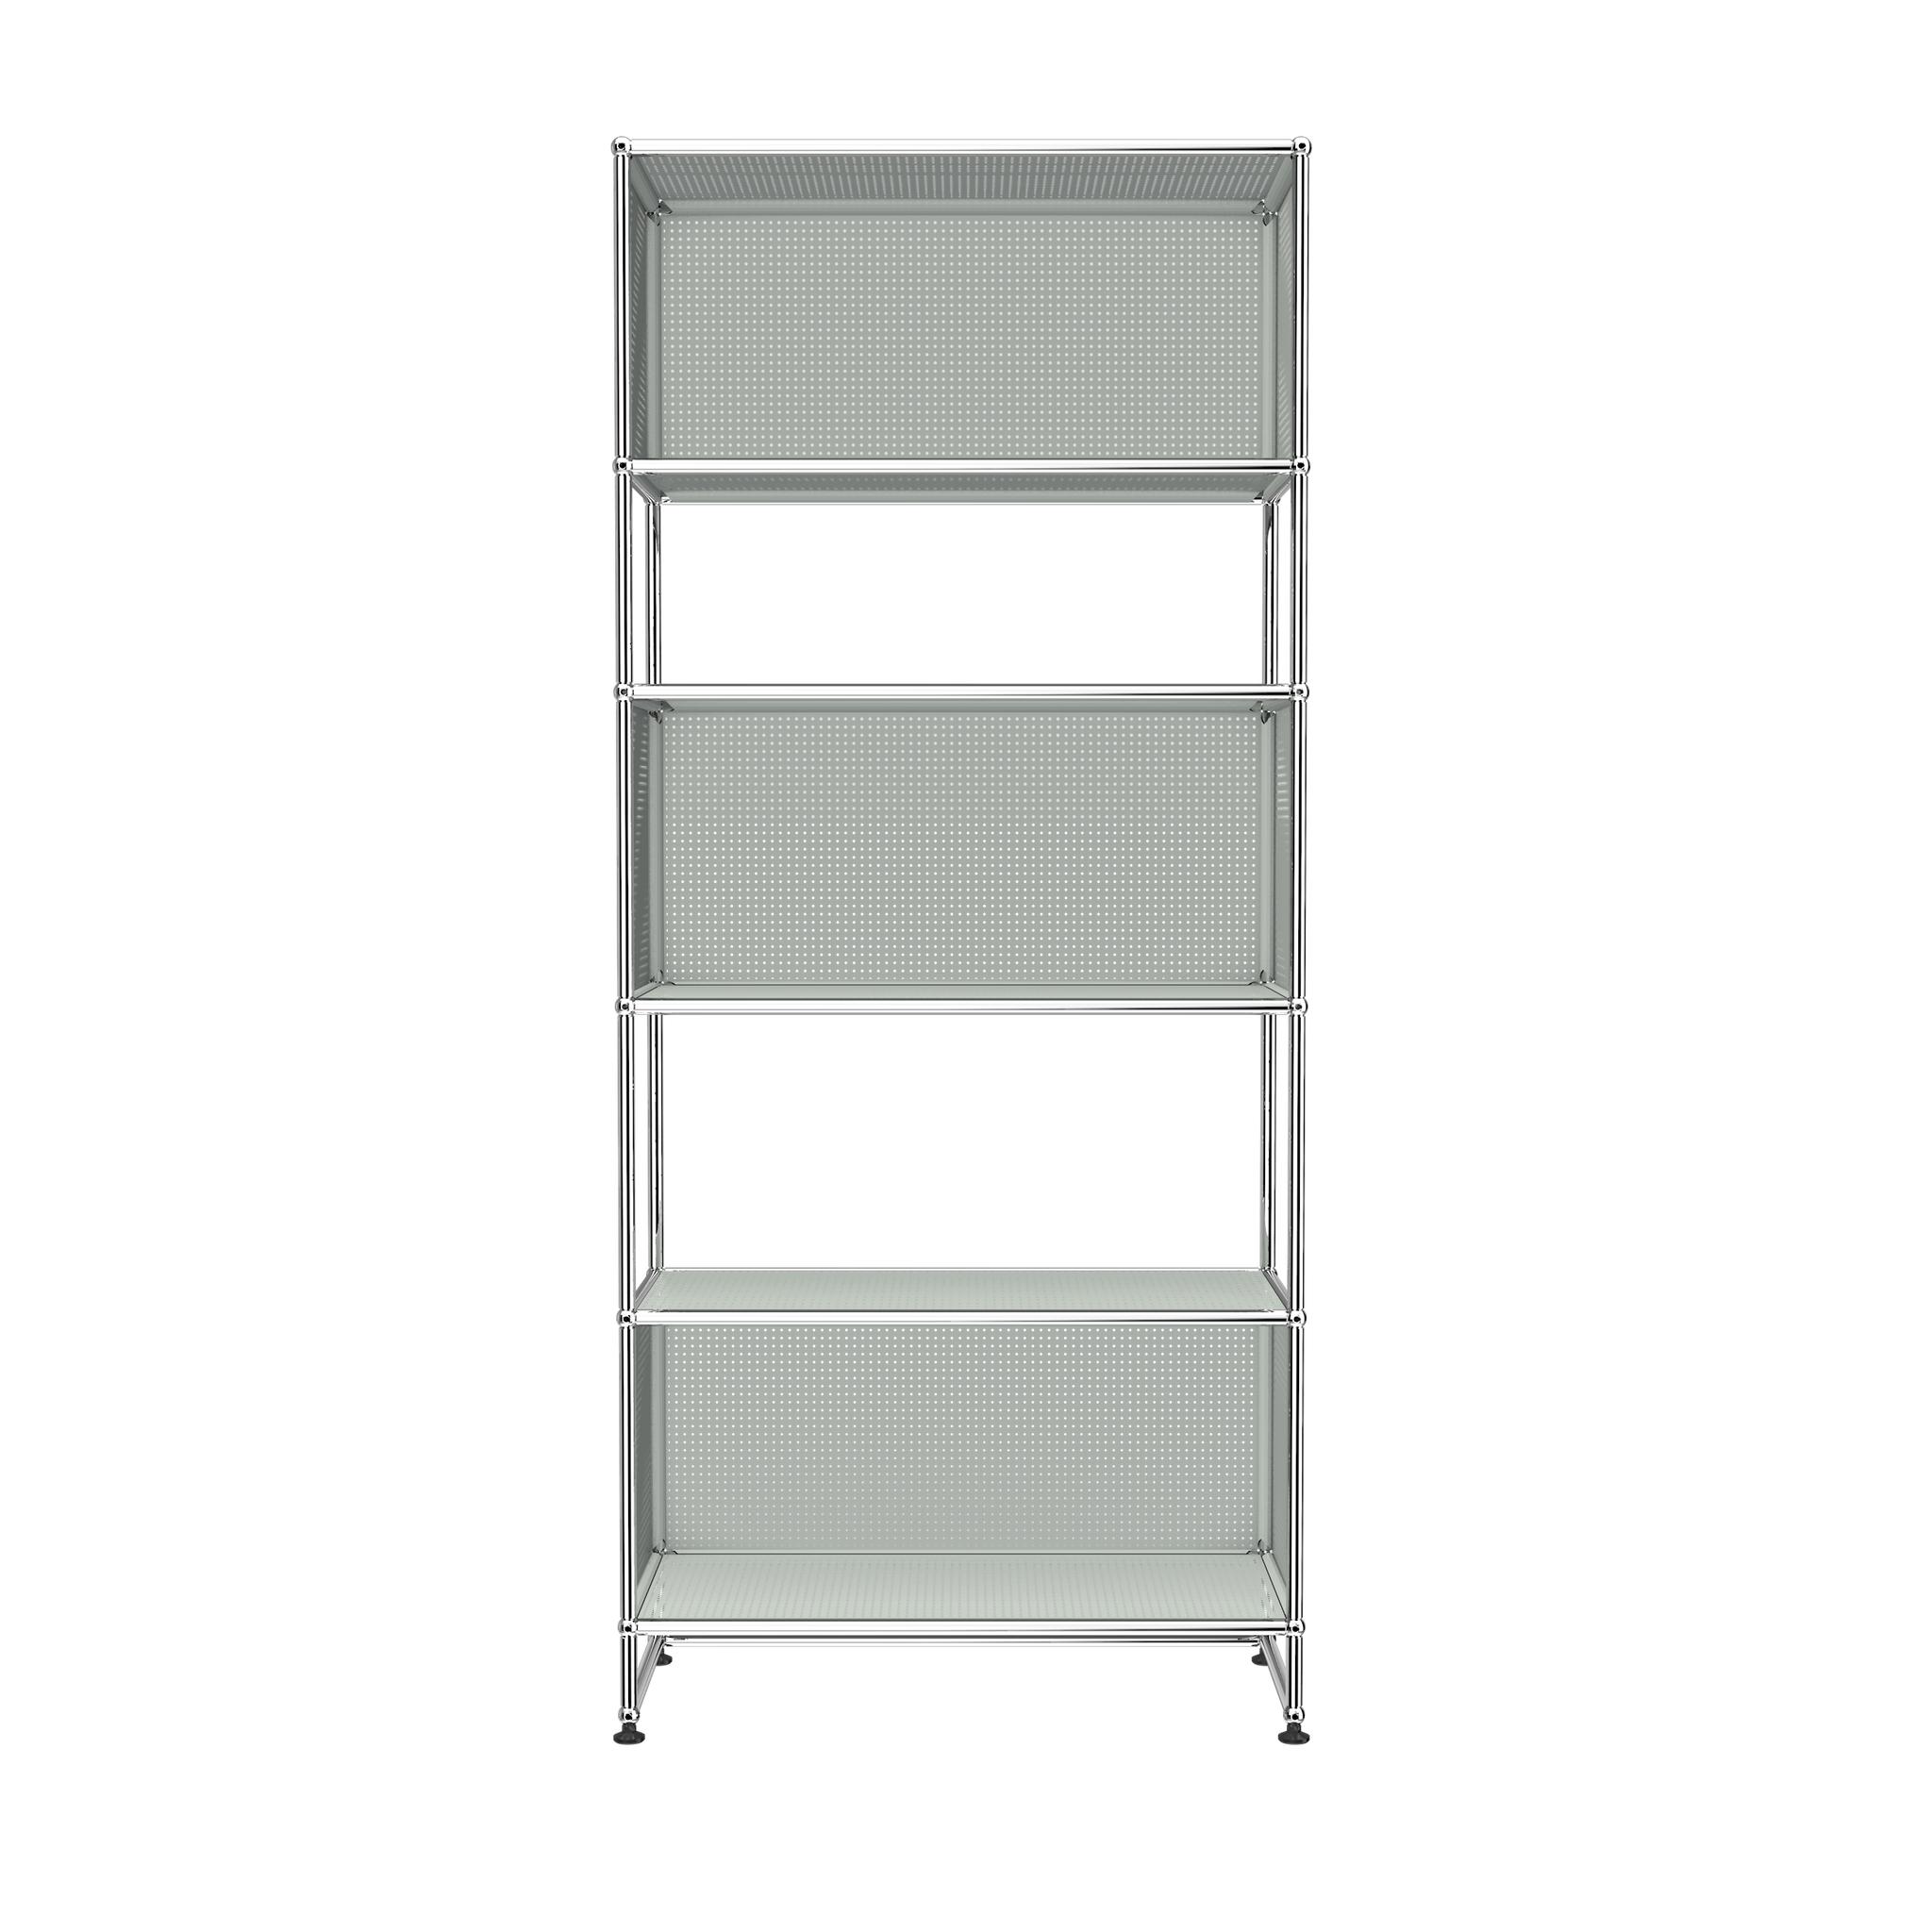 USM Haller 3 Box Shelving with Perforated Panels (RE119) in Light Gray